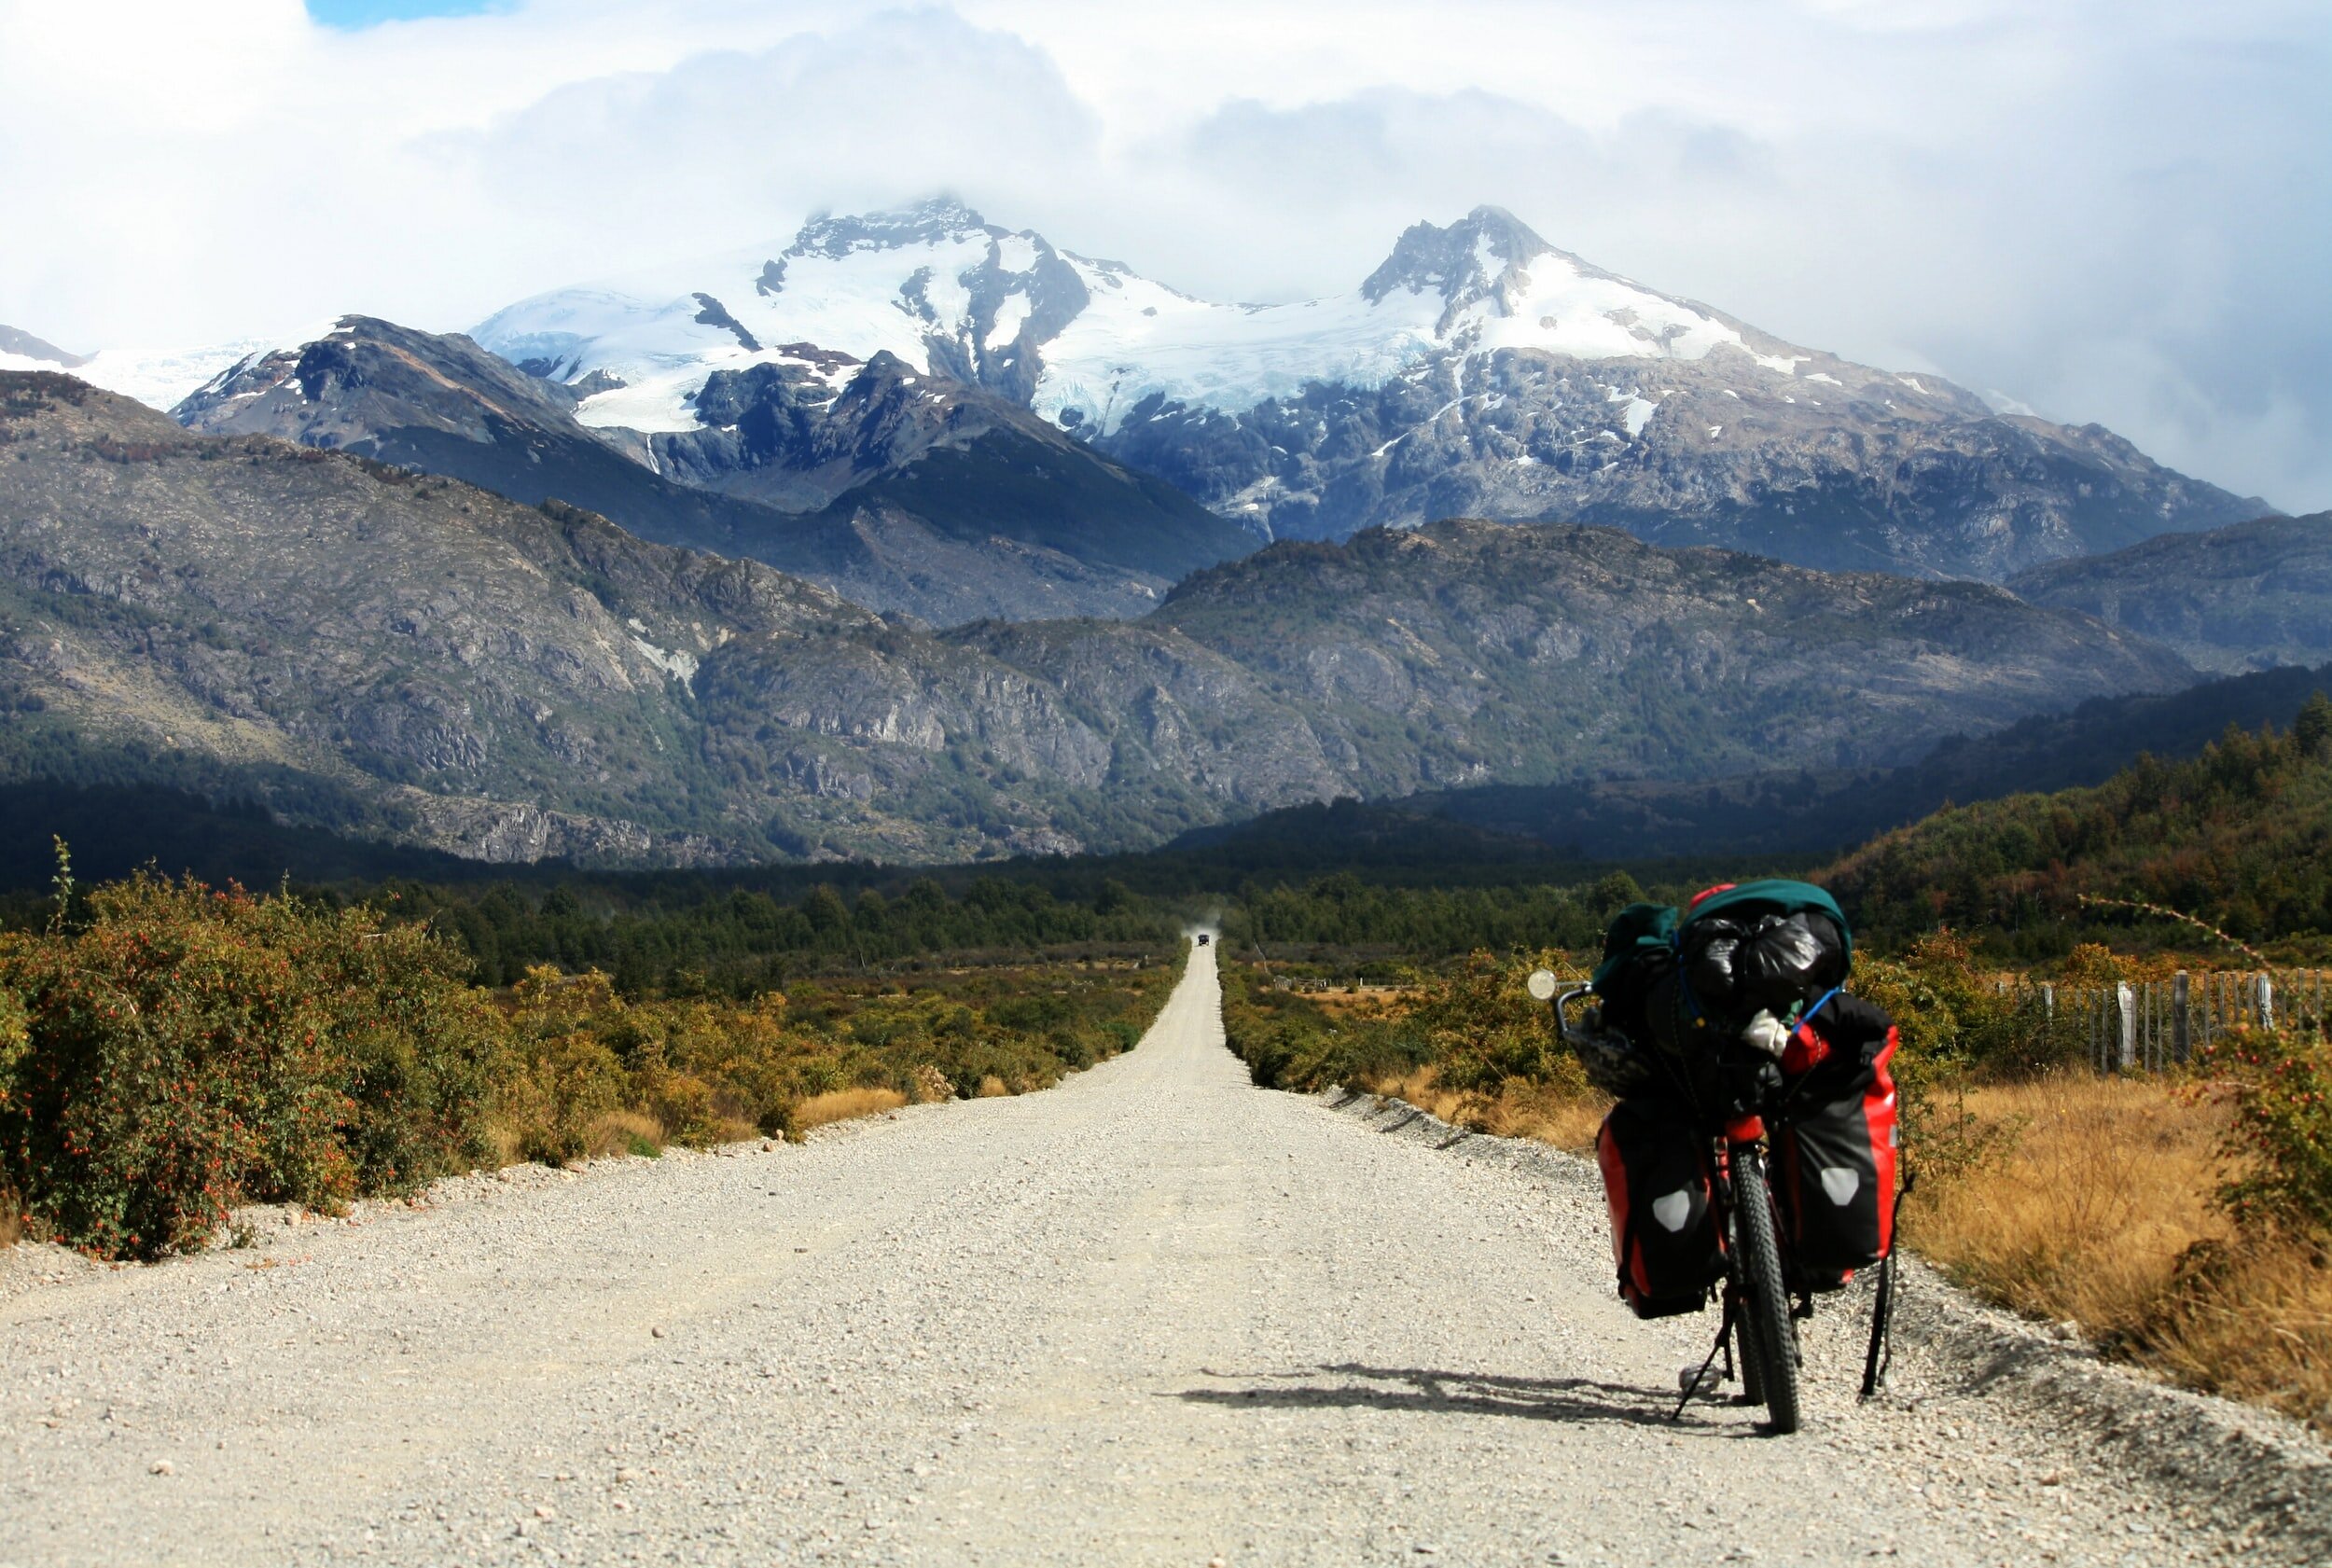 A bicycle laden with bags on an unpaved stretch of the Carretera Austral backed by towering snowcapped mountains in Chile.